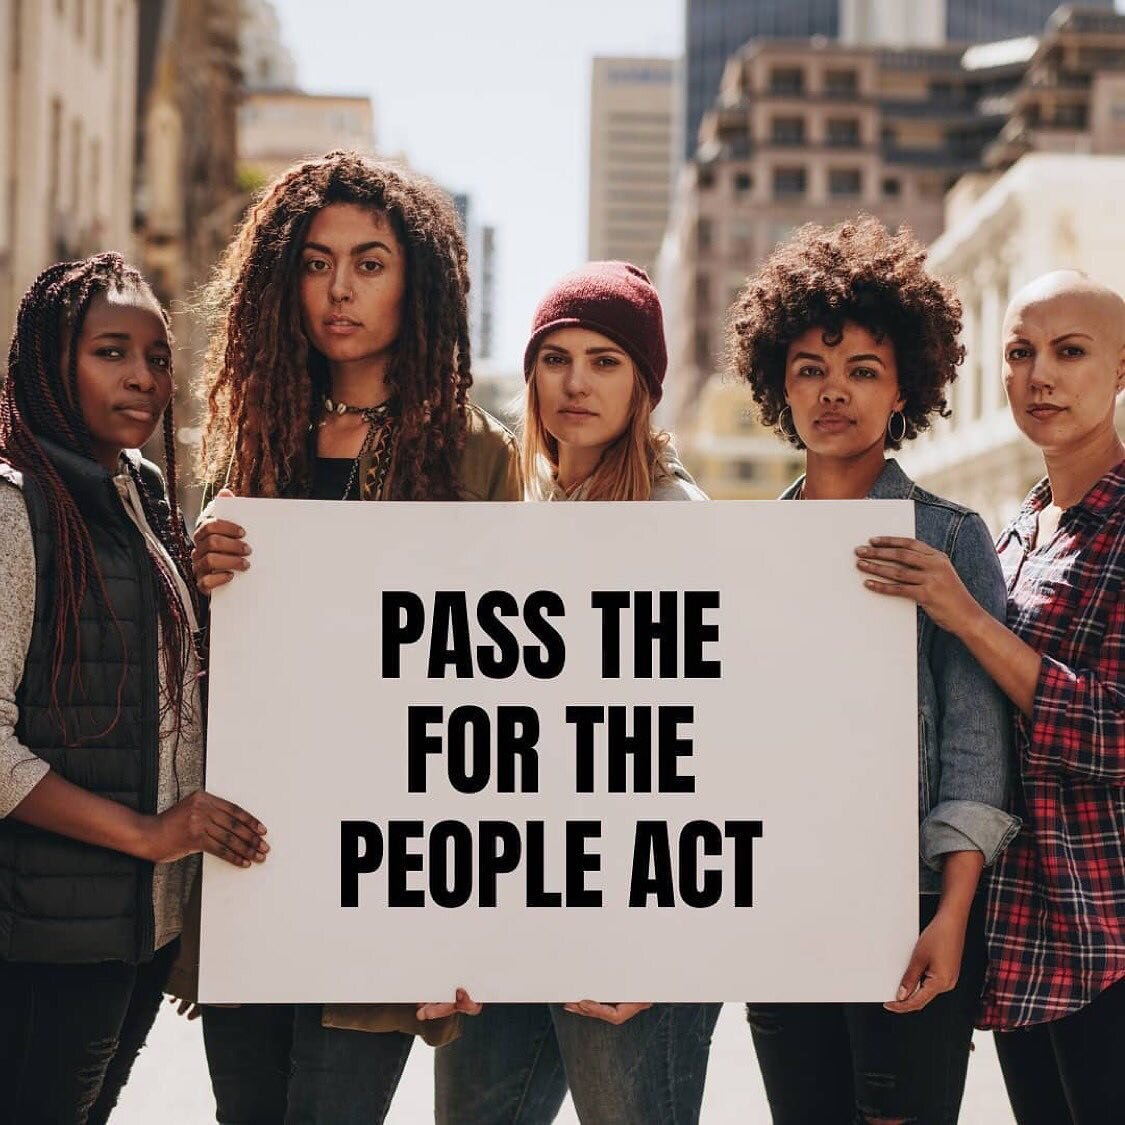 Ask your Senators to #VoteWithLove and pass the #forthepeopleact today 🗳 

Thanks @ignite_national for the encouragement 🙌🏽